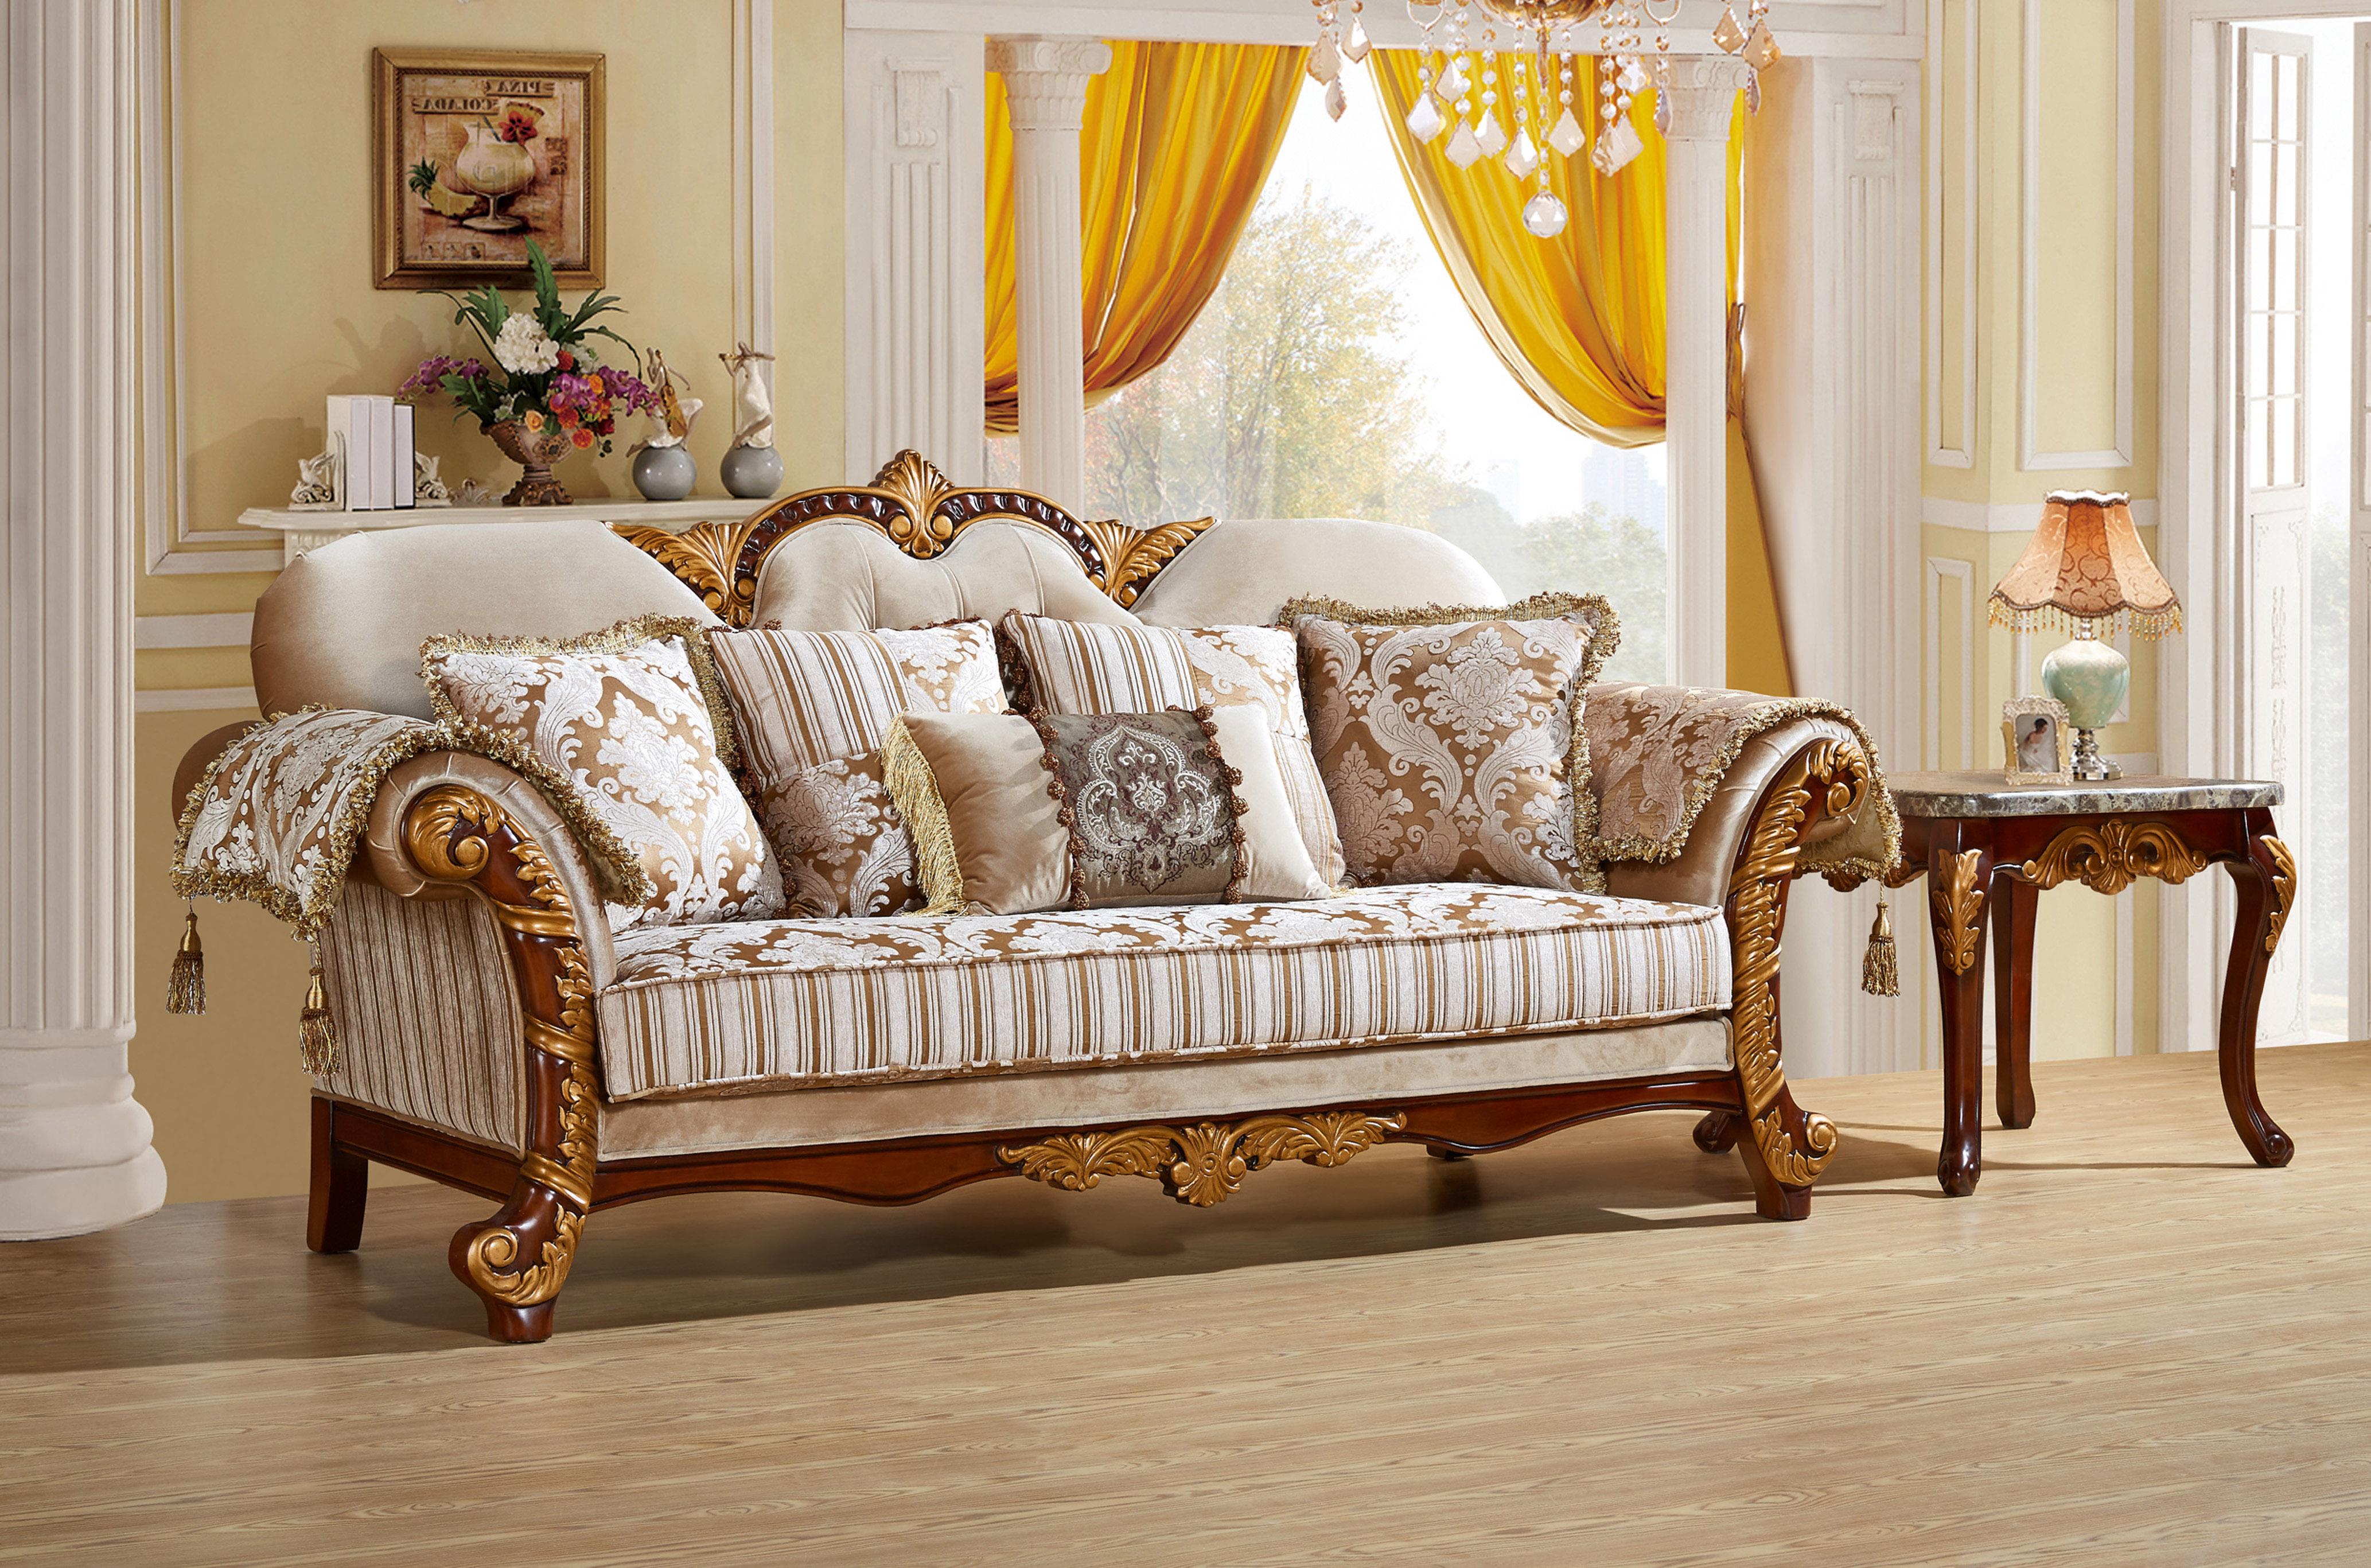 

    
Meridian 651 Camelia Cream w/Gold Living Room Set 3Pcs Carved Wood Traditional
